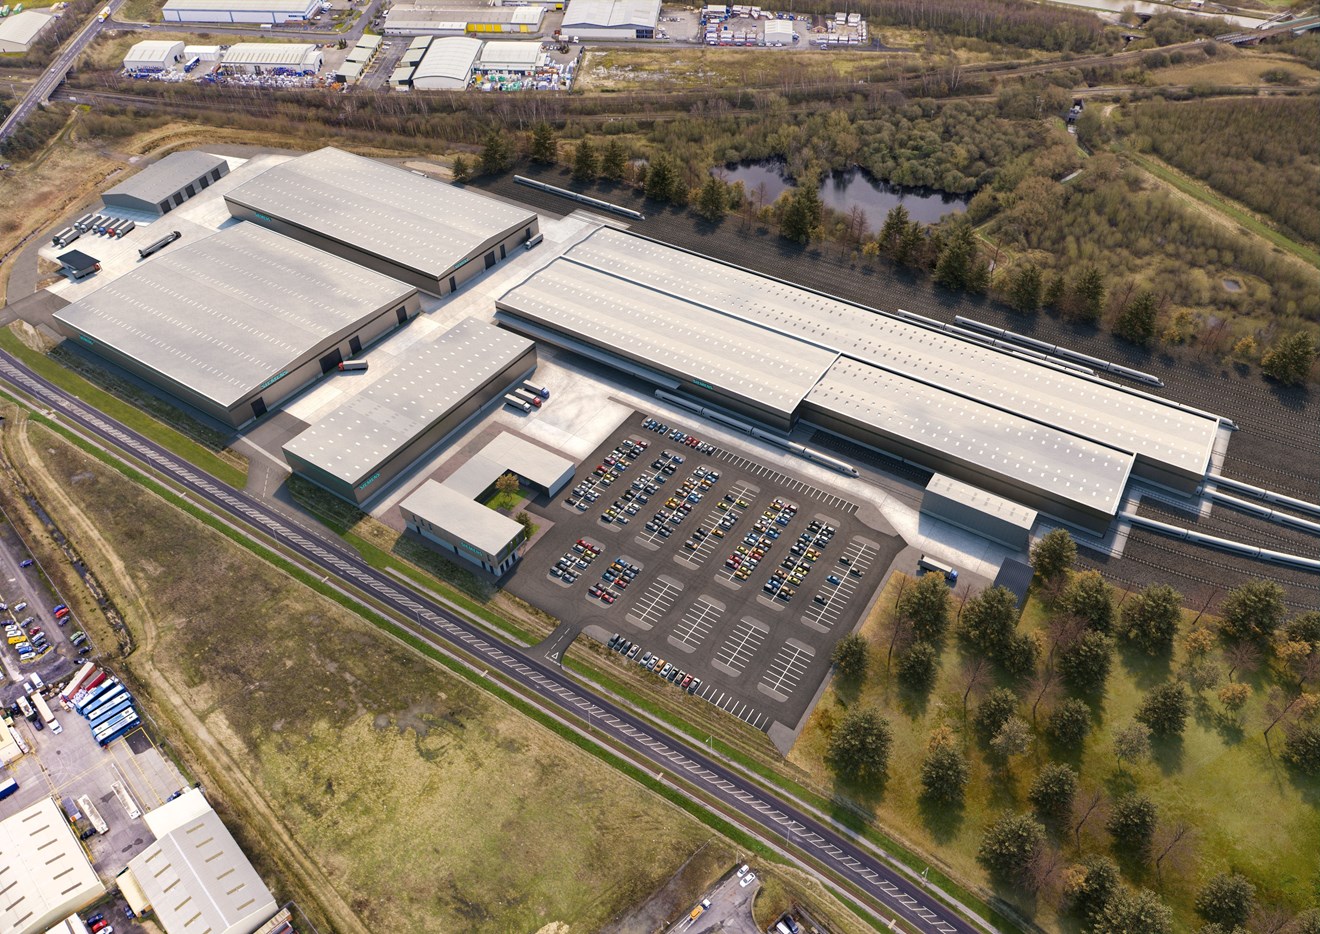 New images show exciting vision for Goole rail manufacturing site: Siemens Mobility Goole site CGI South perspective Feb 2020